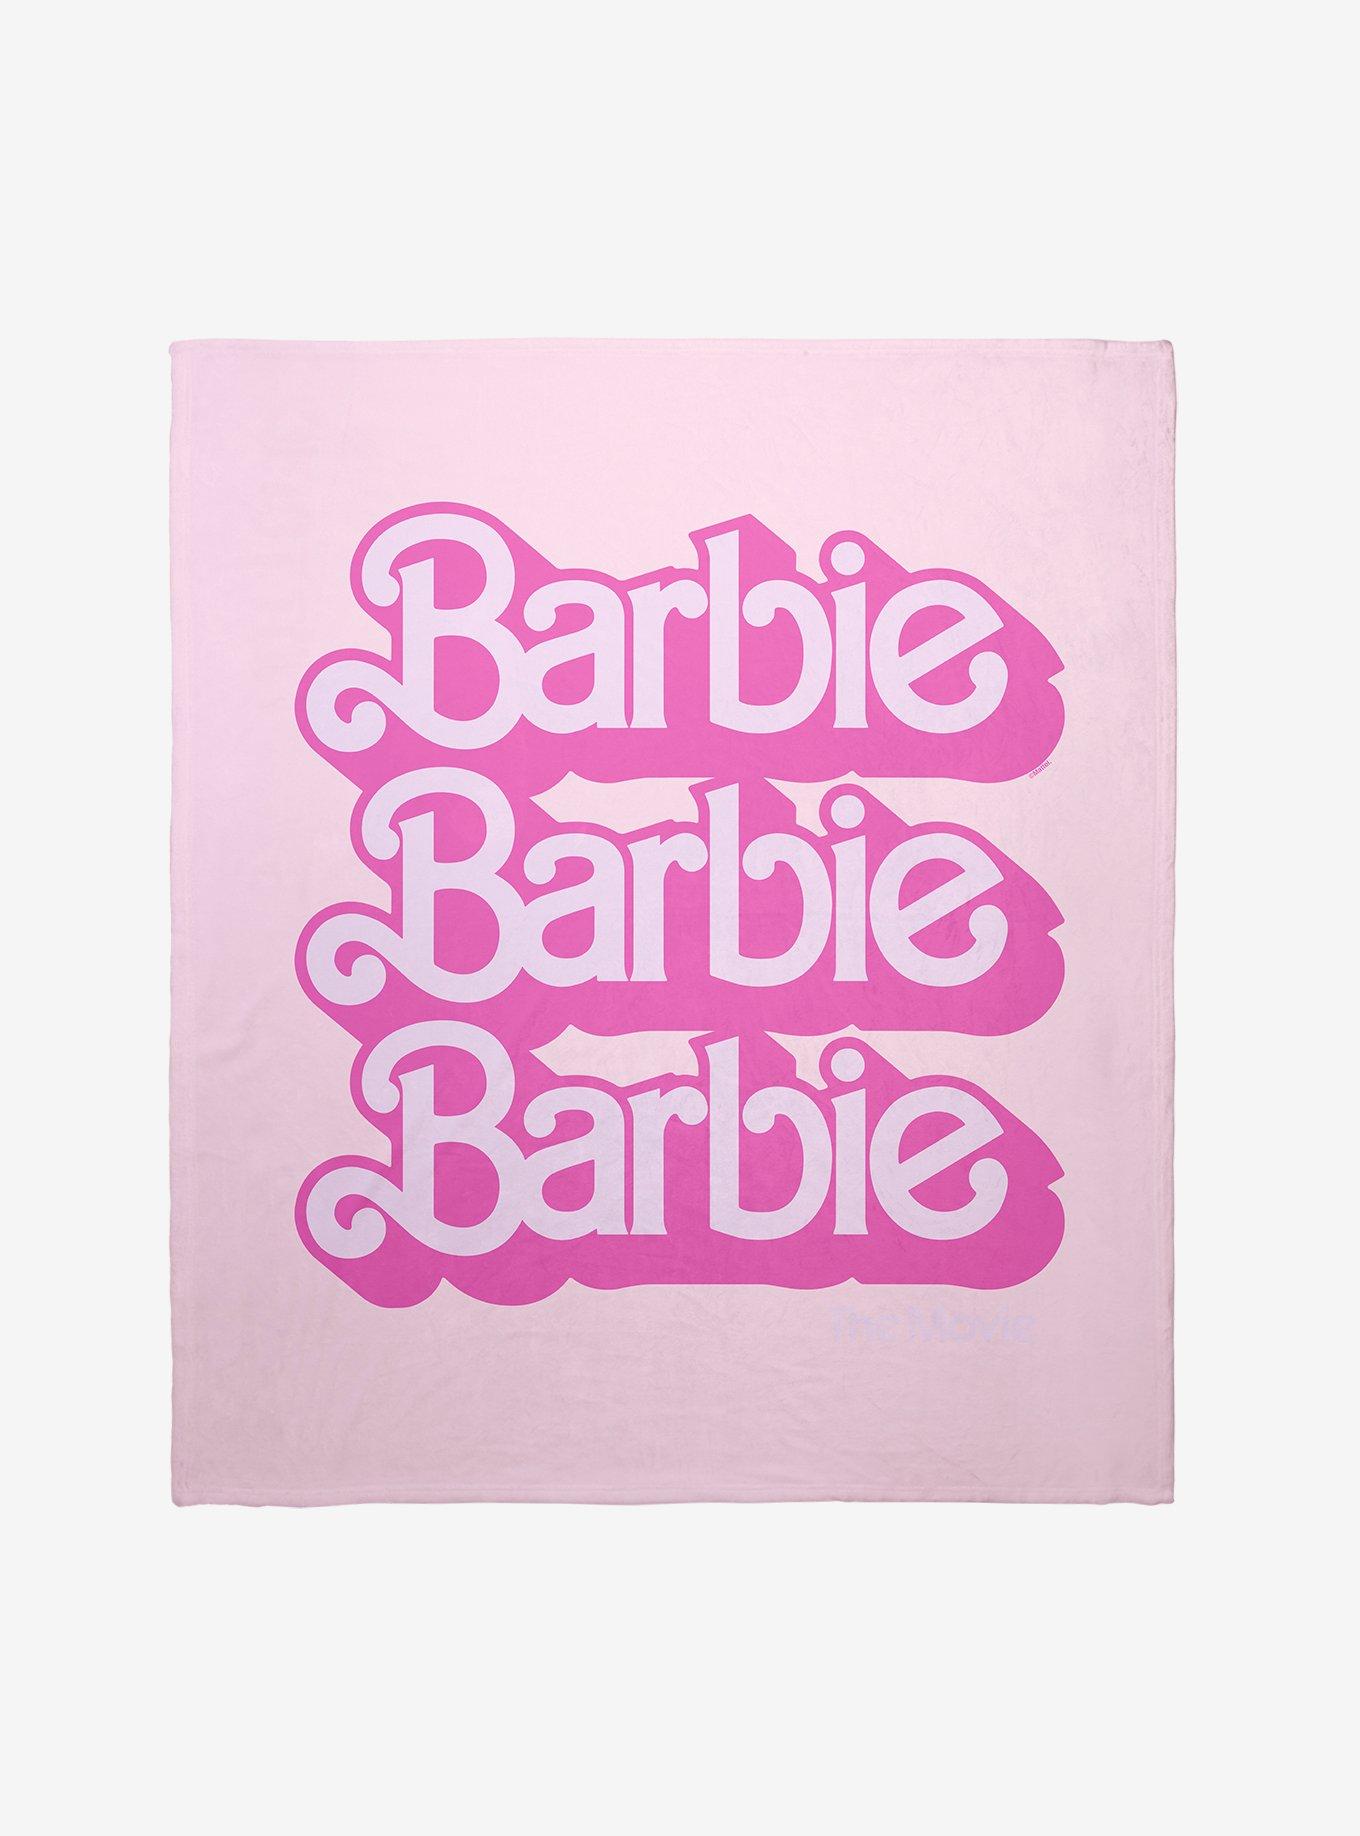 Vtg 90s Rare Barbie Throw Blanket for Sale in Whitehall, PA - OfferUp